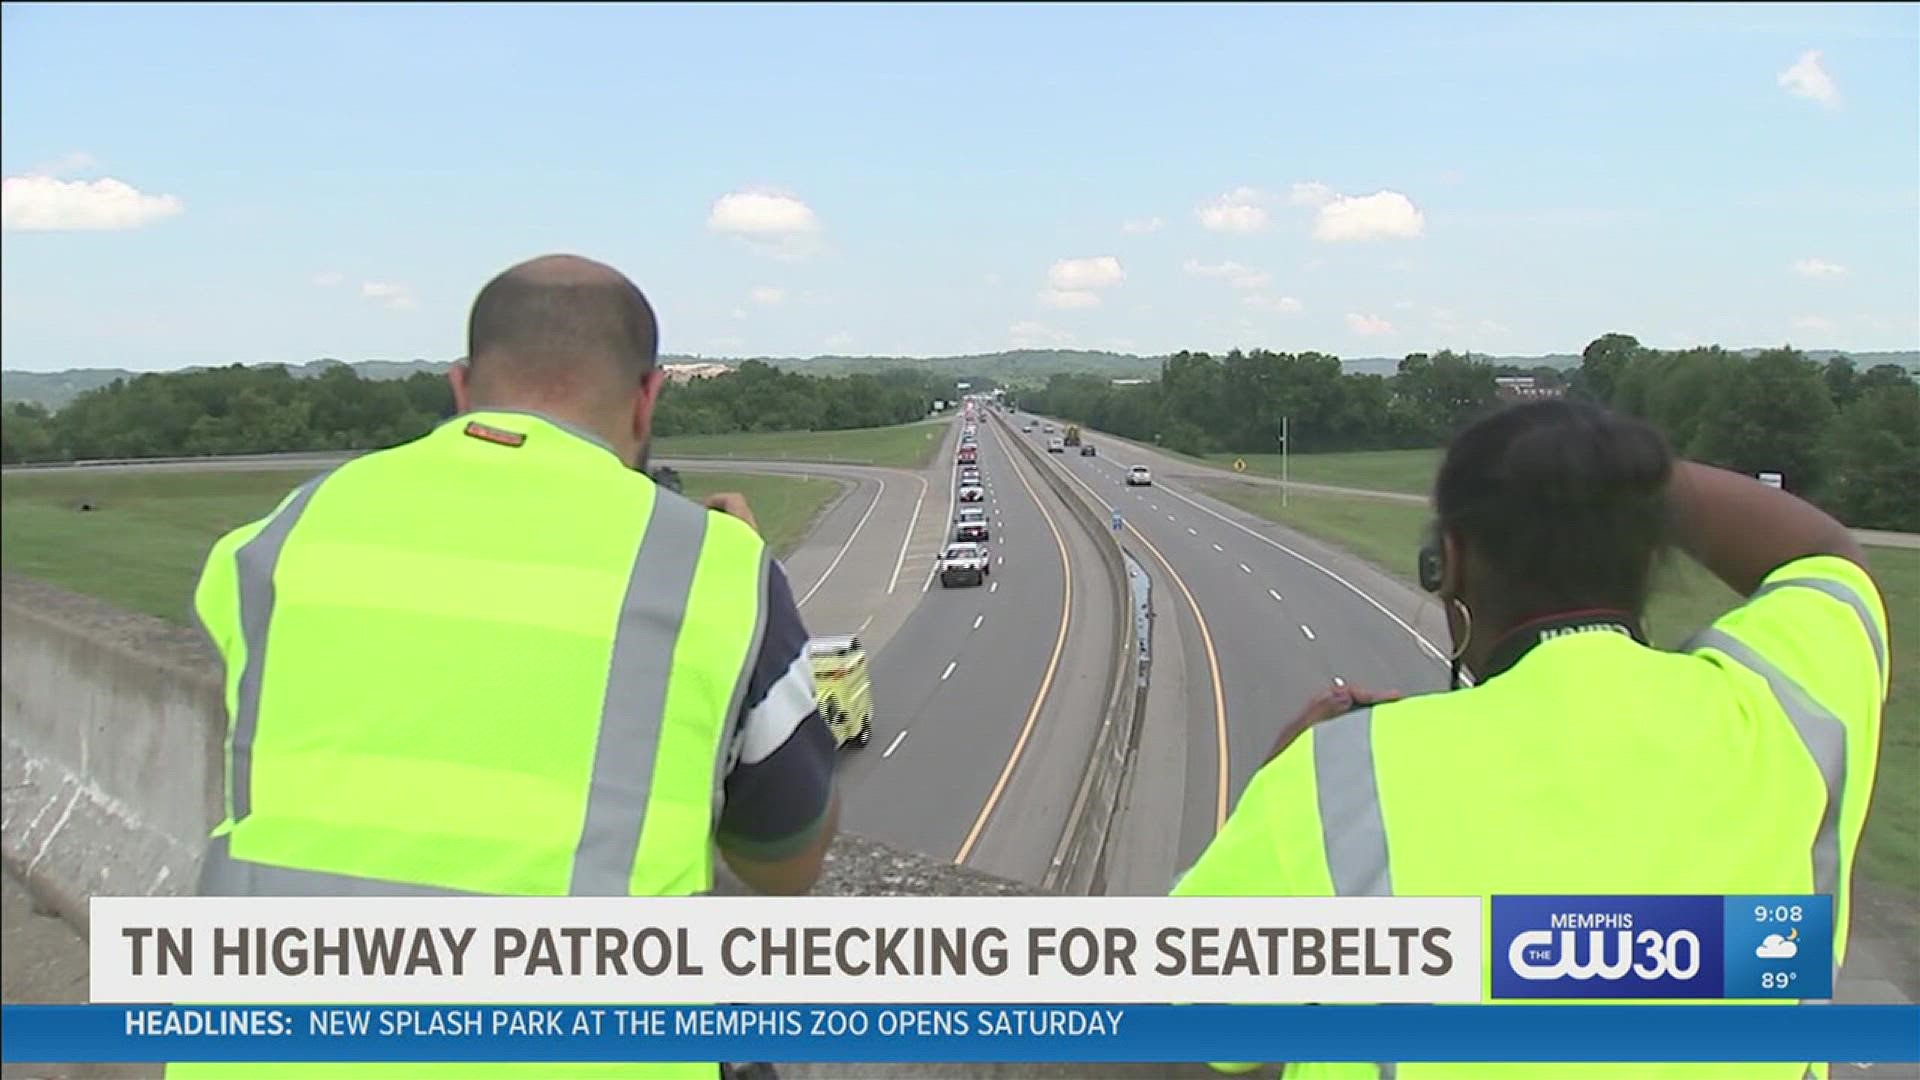 If you're caught without a seatbelt during the checkpoint, expect to pay at least $30 if it's your first offense.